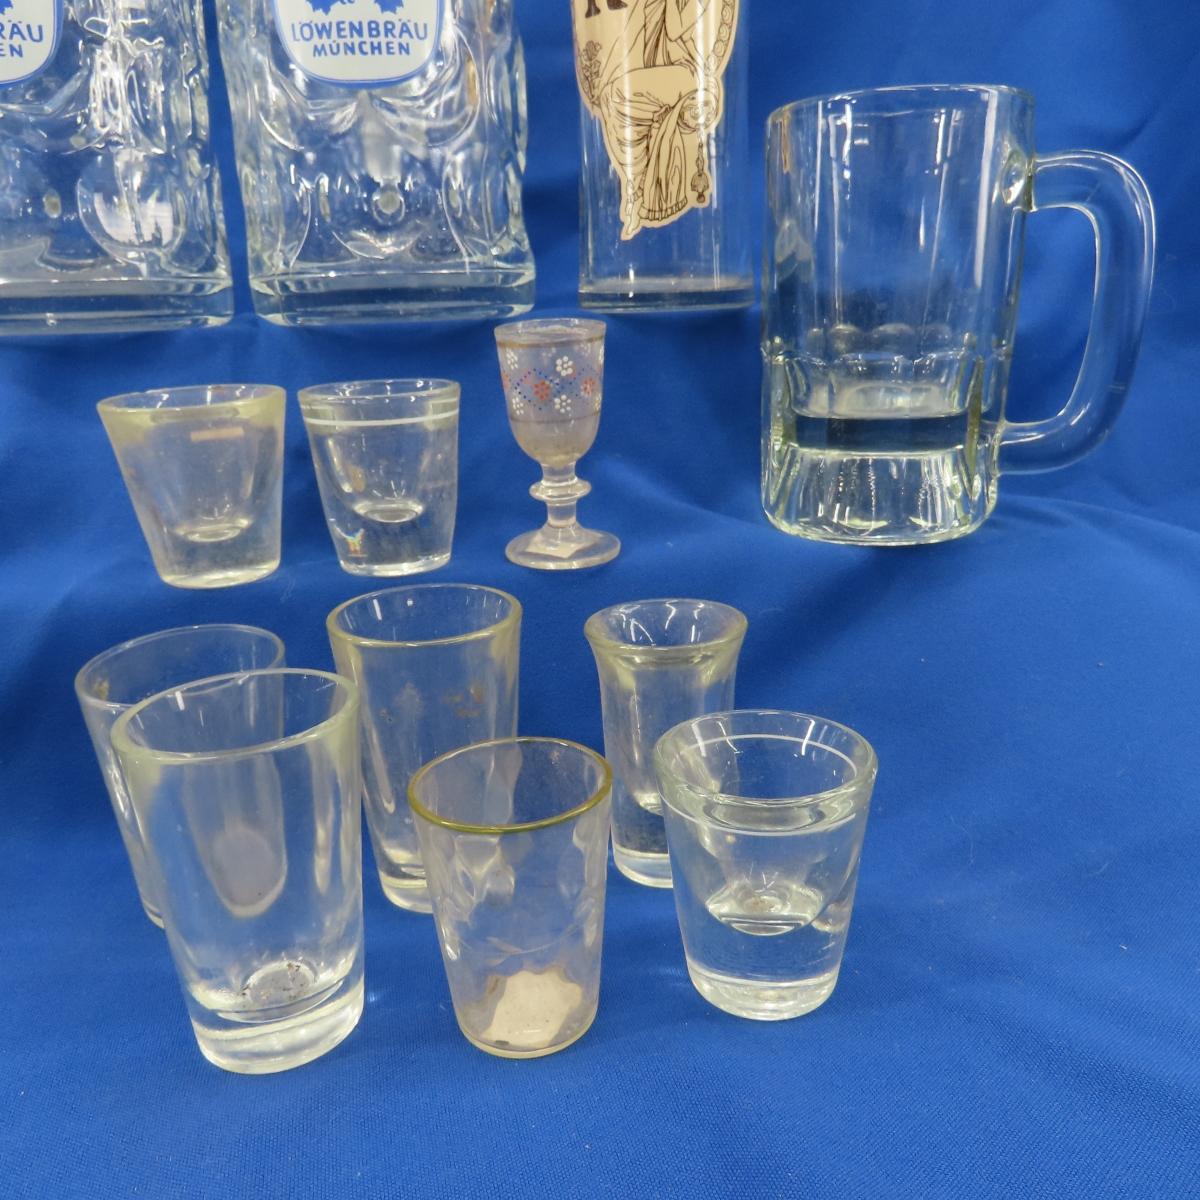 1 Liter Lowenbrau Steins and Other Bar Ware